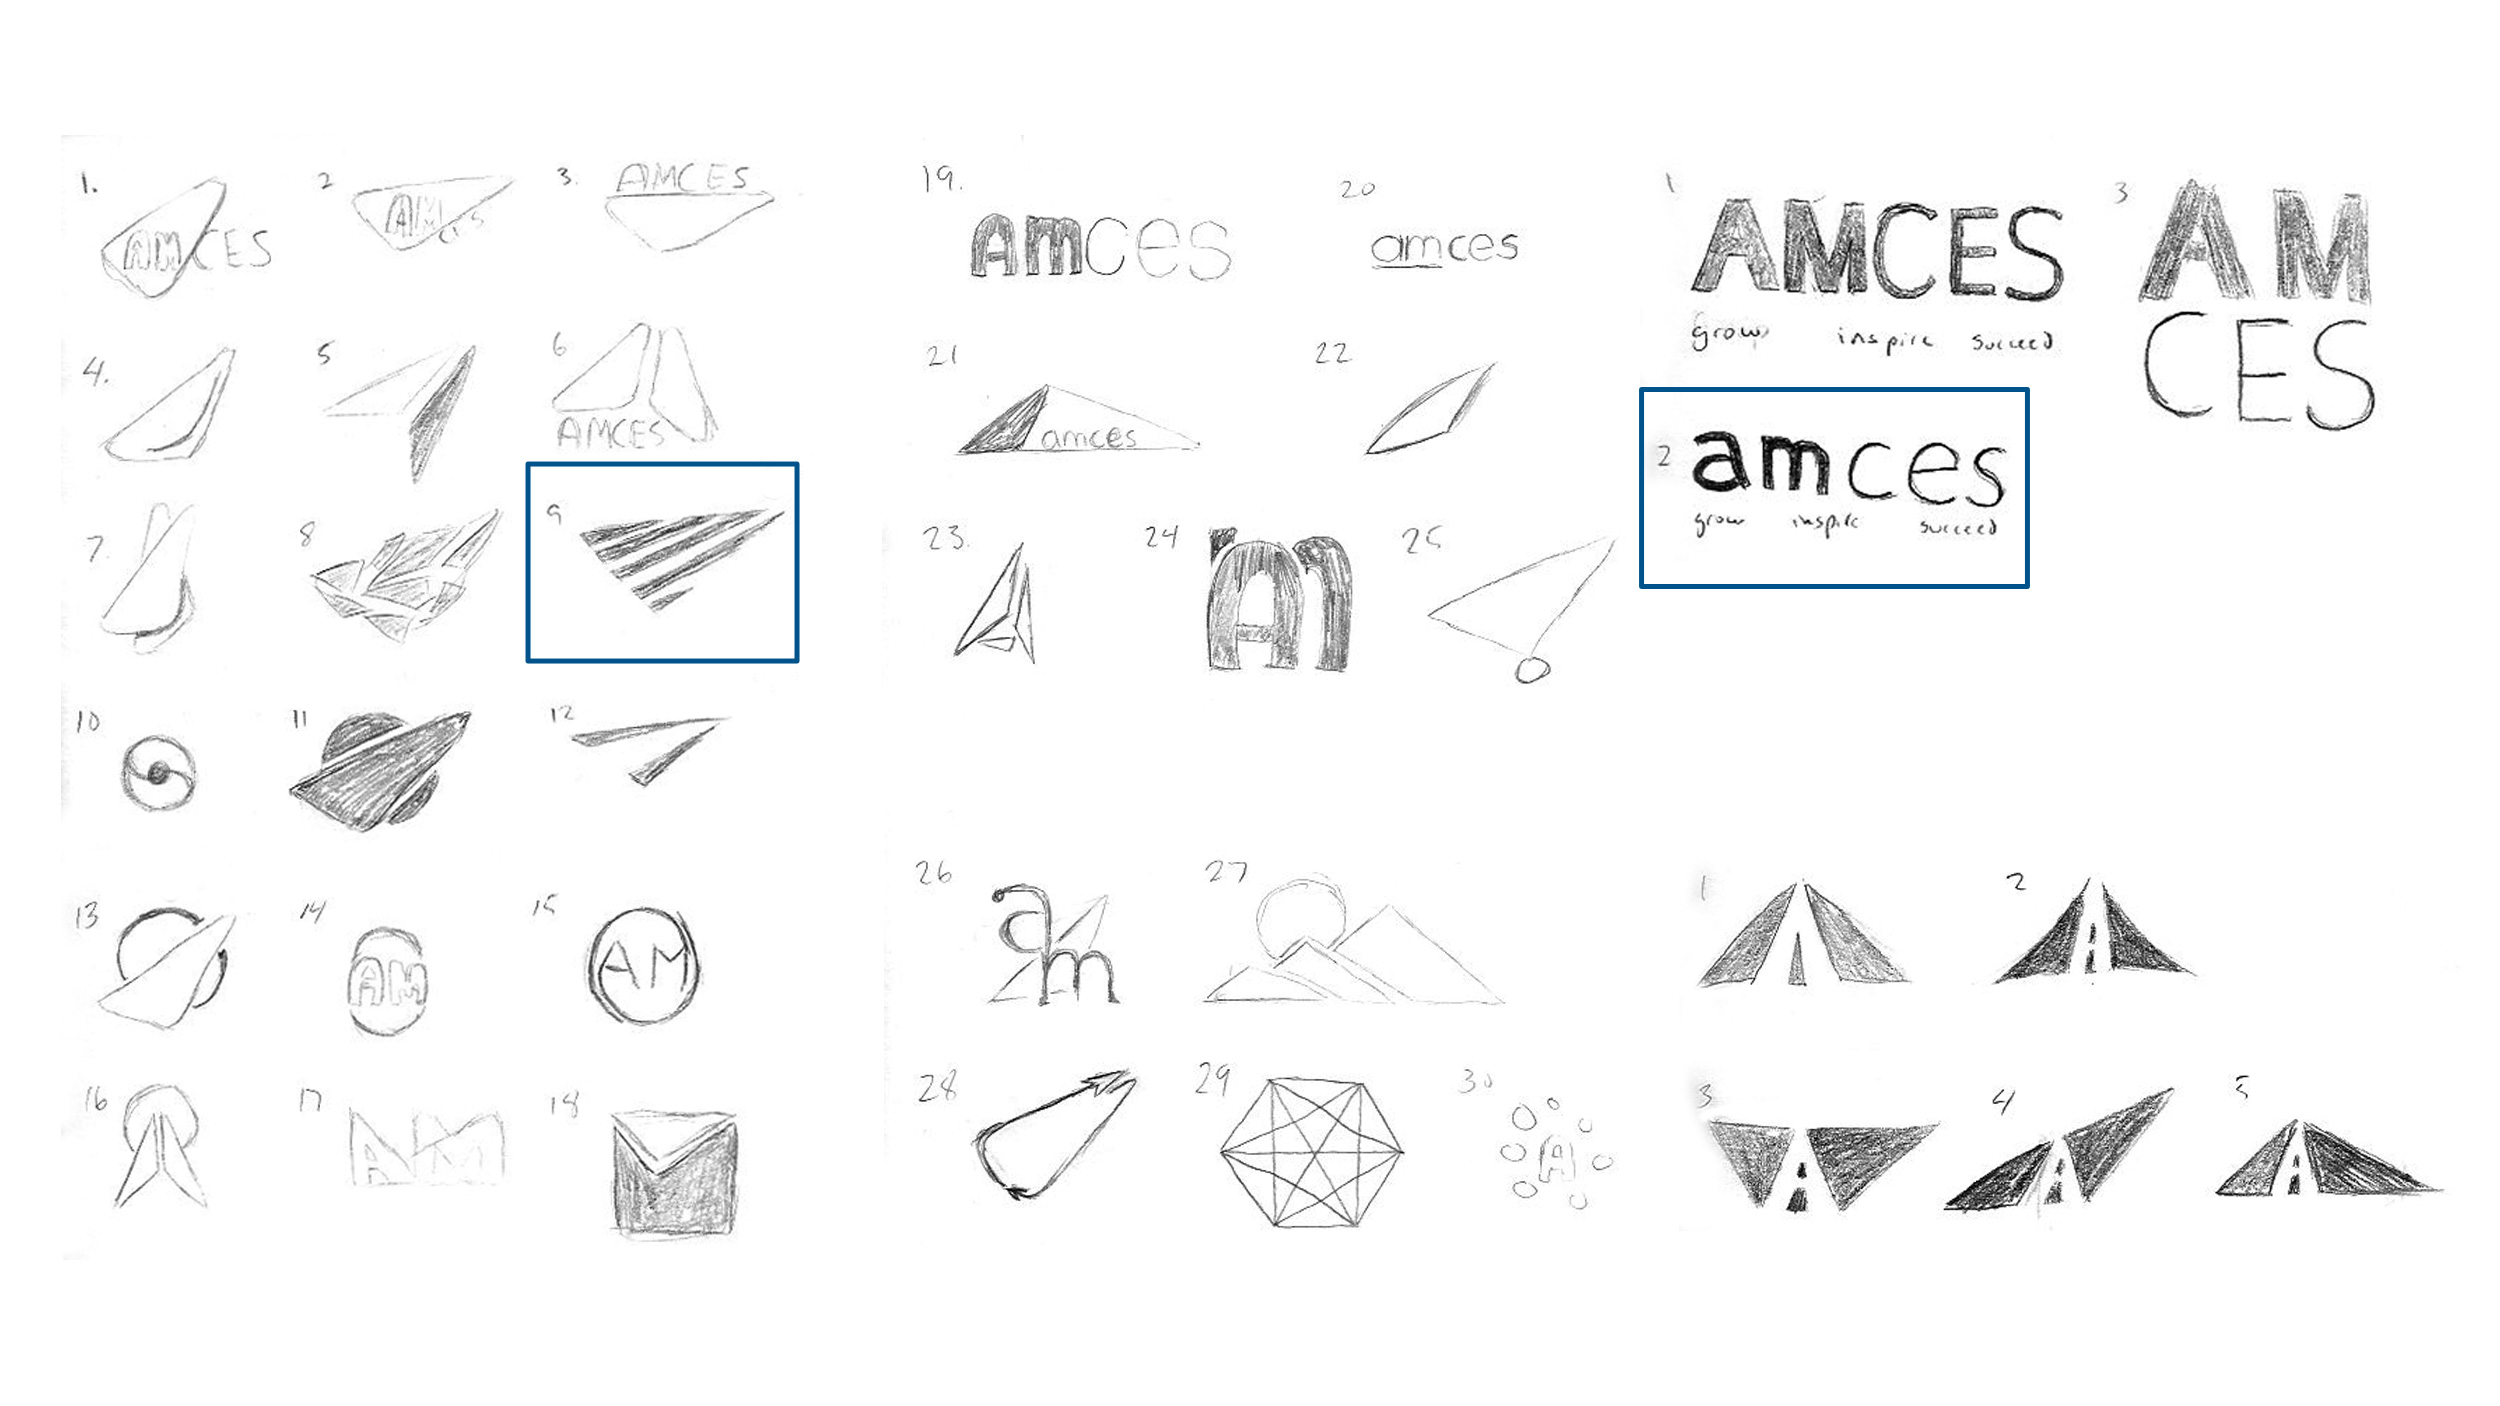 A collection of concepts from the initial round of logo sketches.